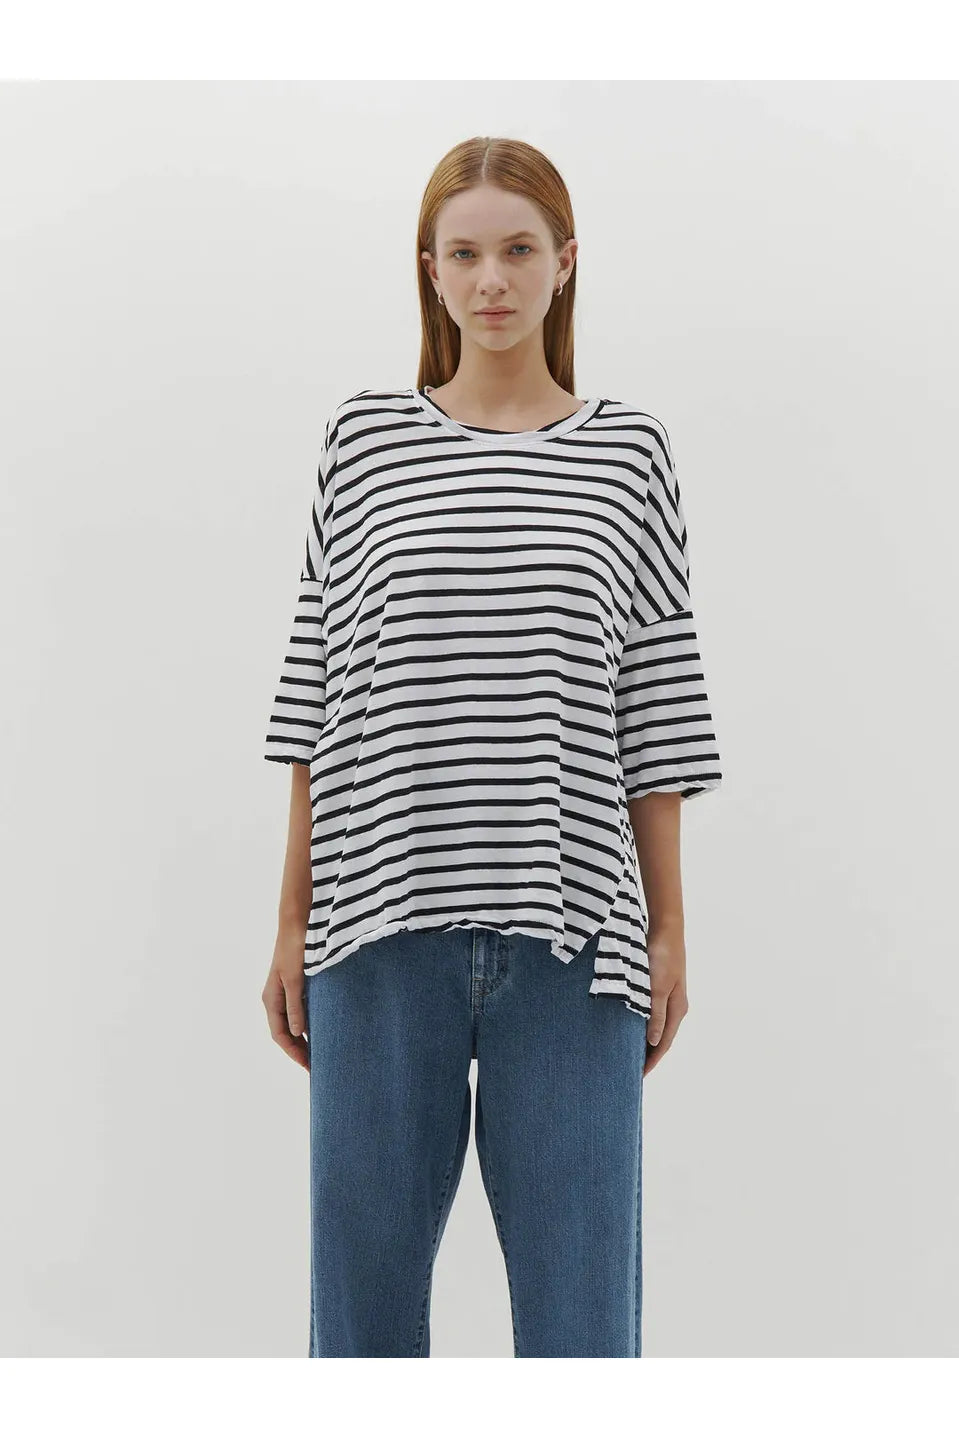 Stripe Slouch Short Sleeve T-shirt in Black + Undyed by Bassike